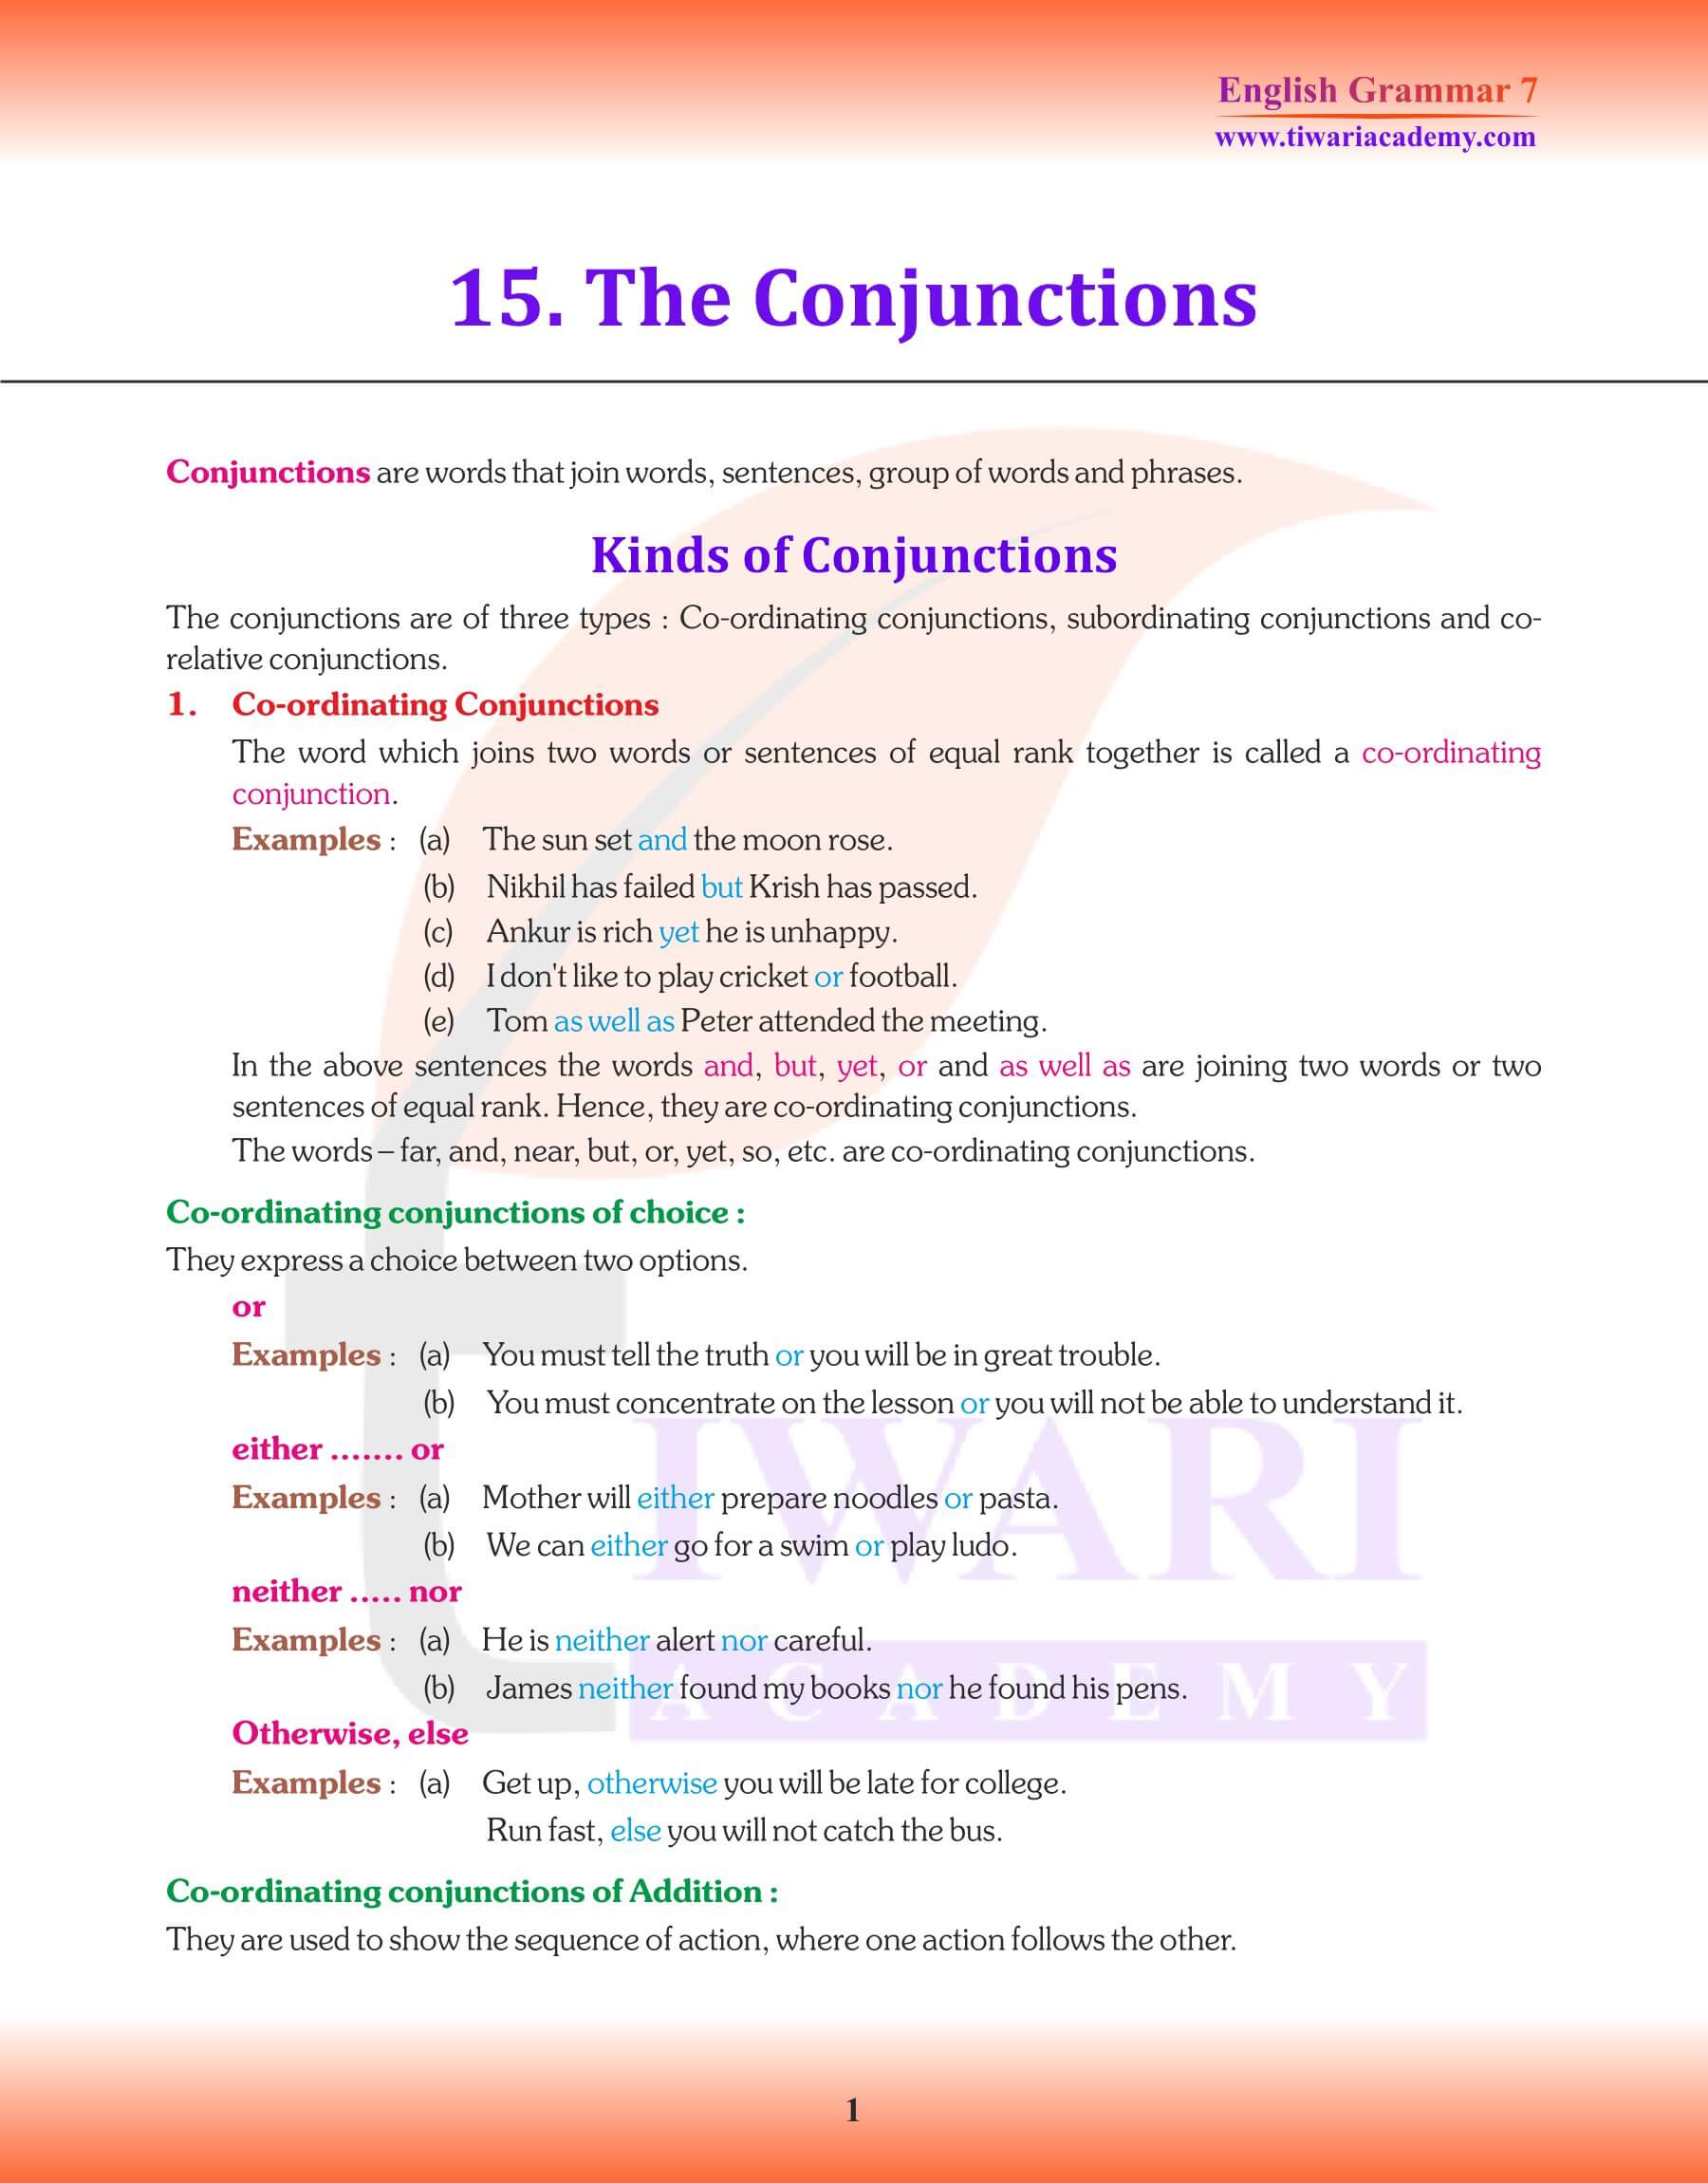 Class 7 English Grammar Chapter 15 Revision Book